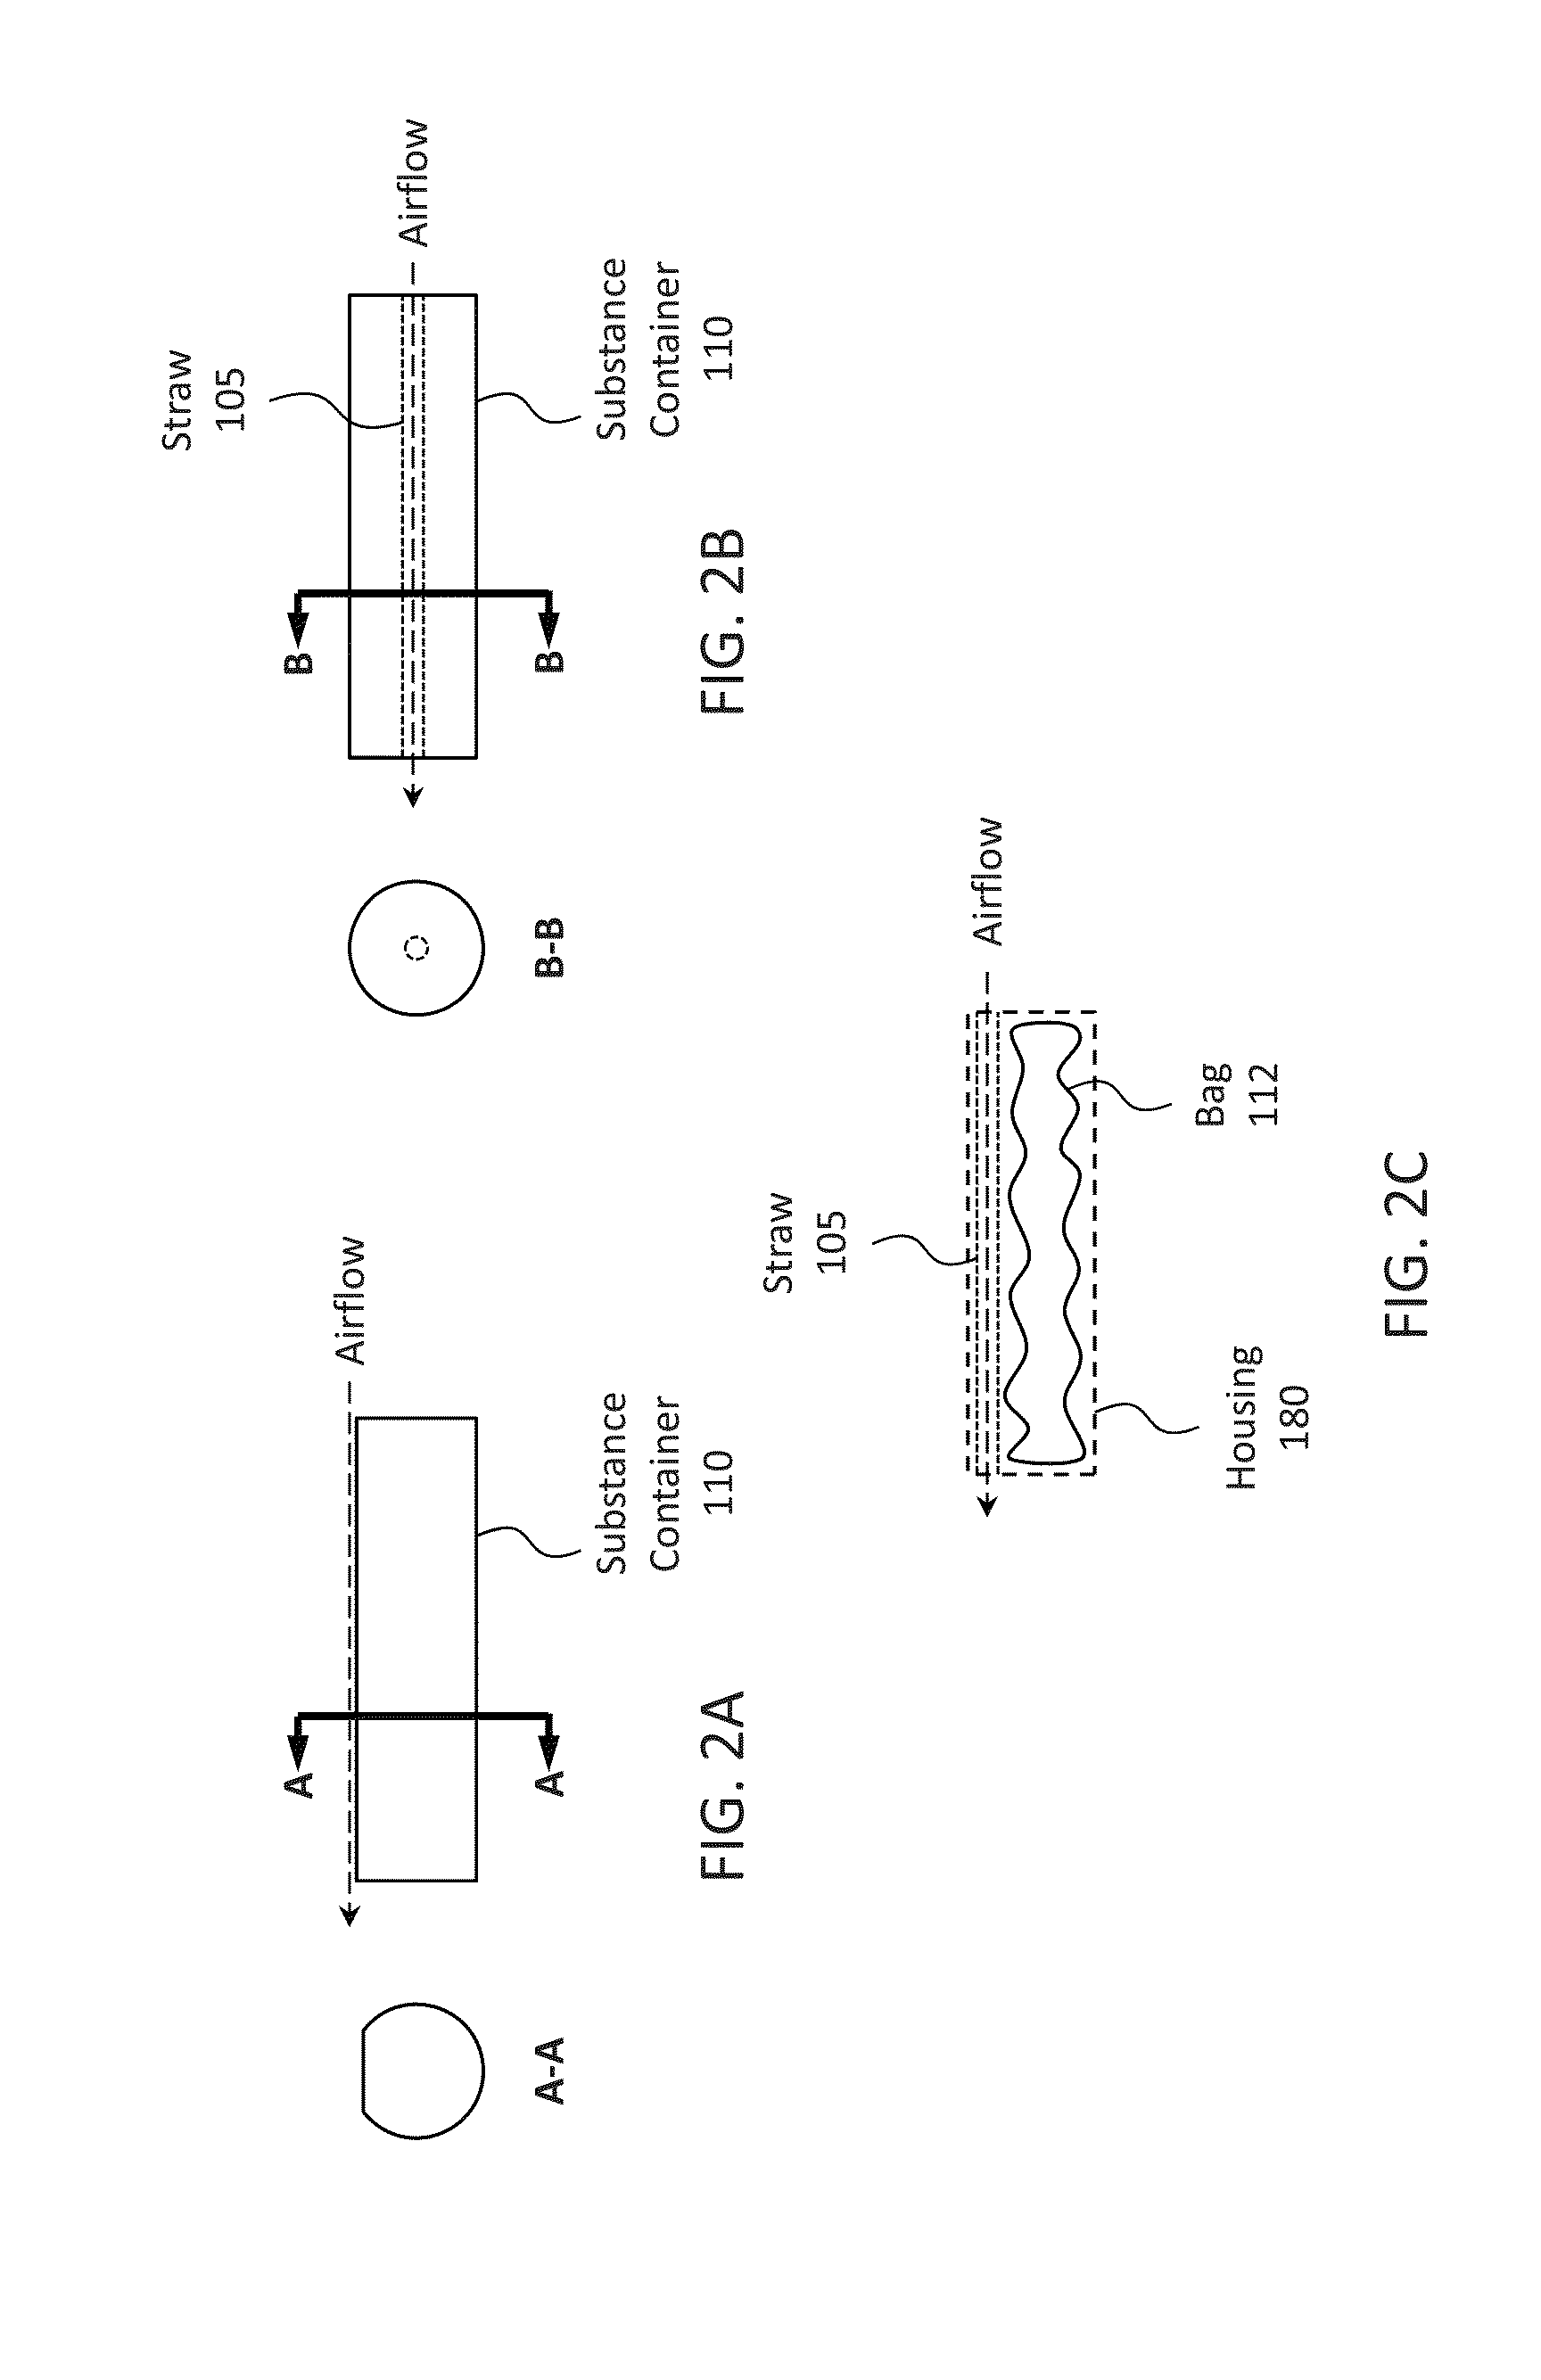 Systems and methods for a vaporization device and product usage control and documentation